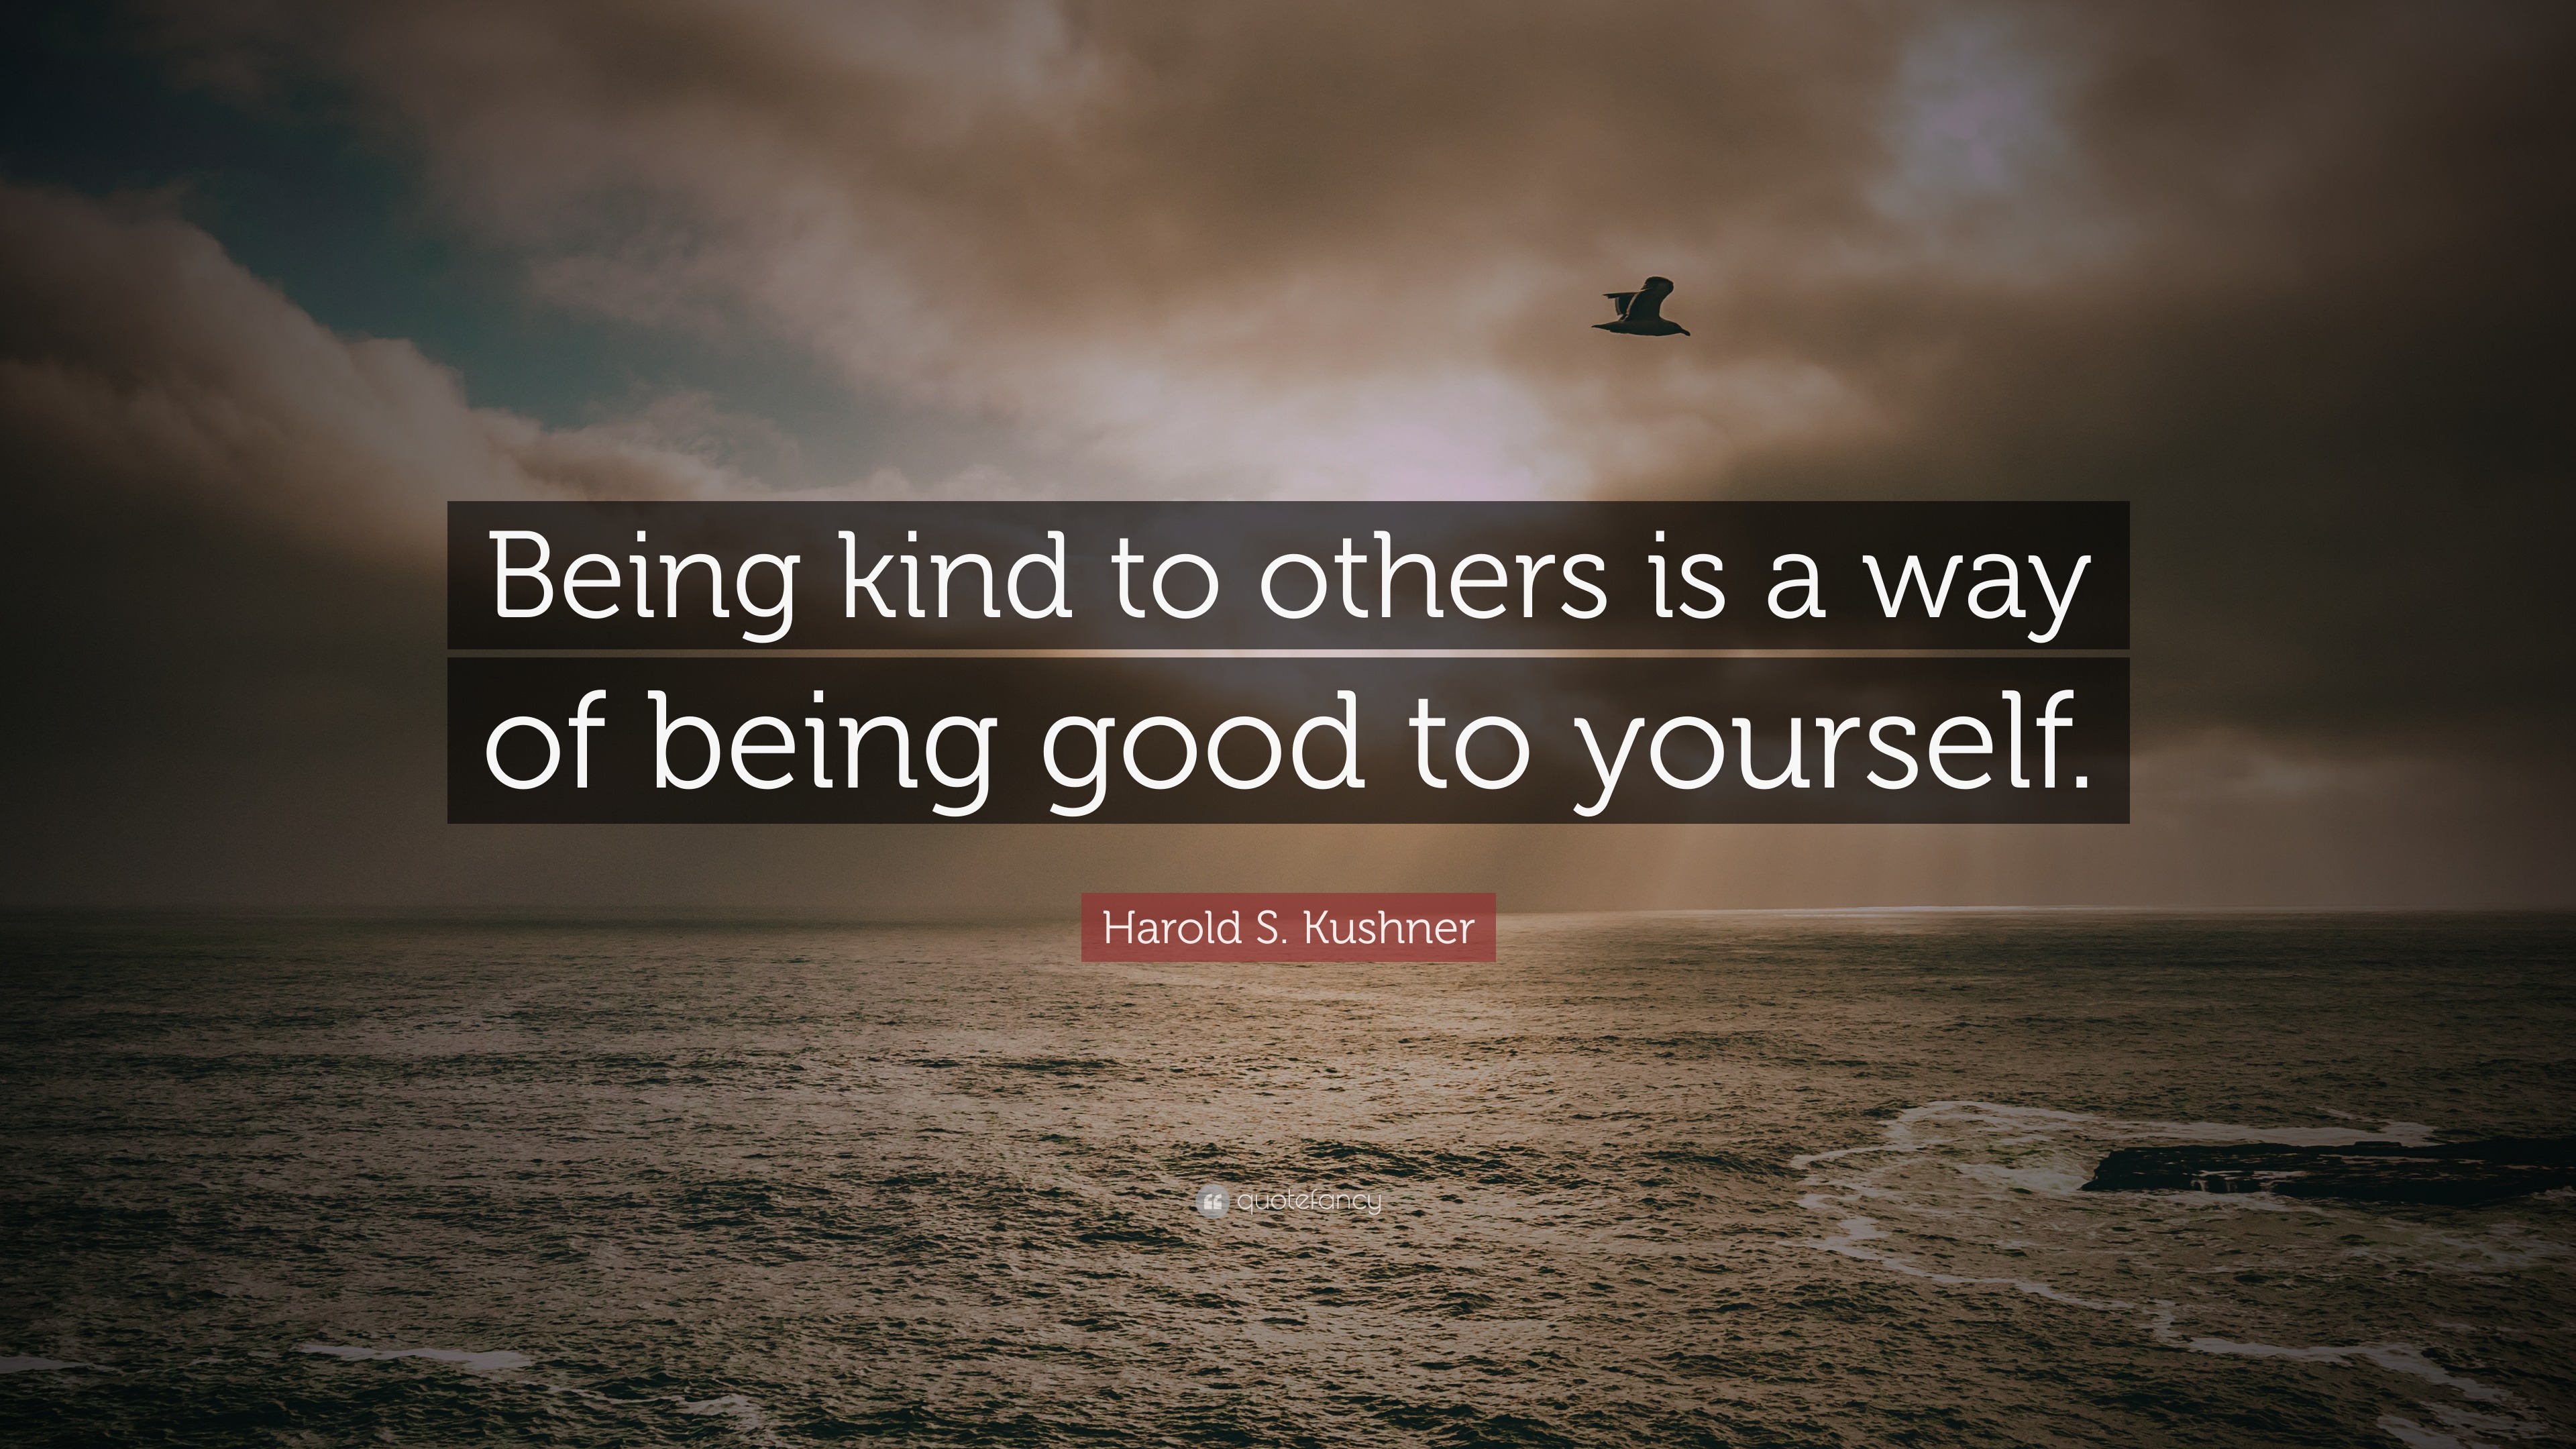 Harold S. Kushner Quote: “Being kind to others is a way of being good ...